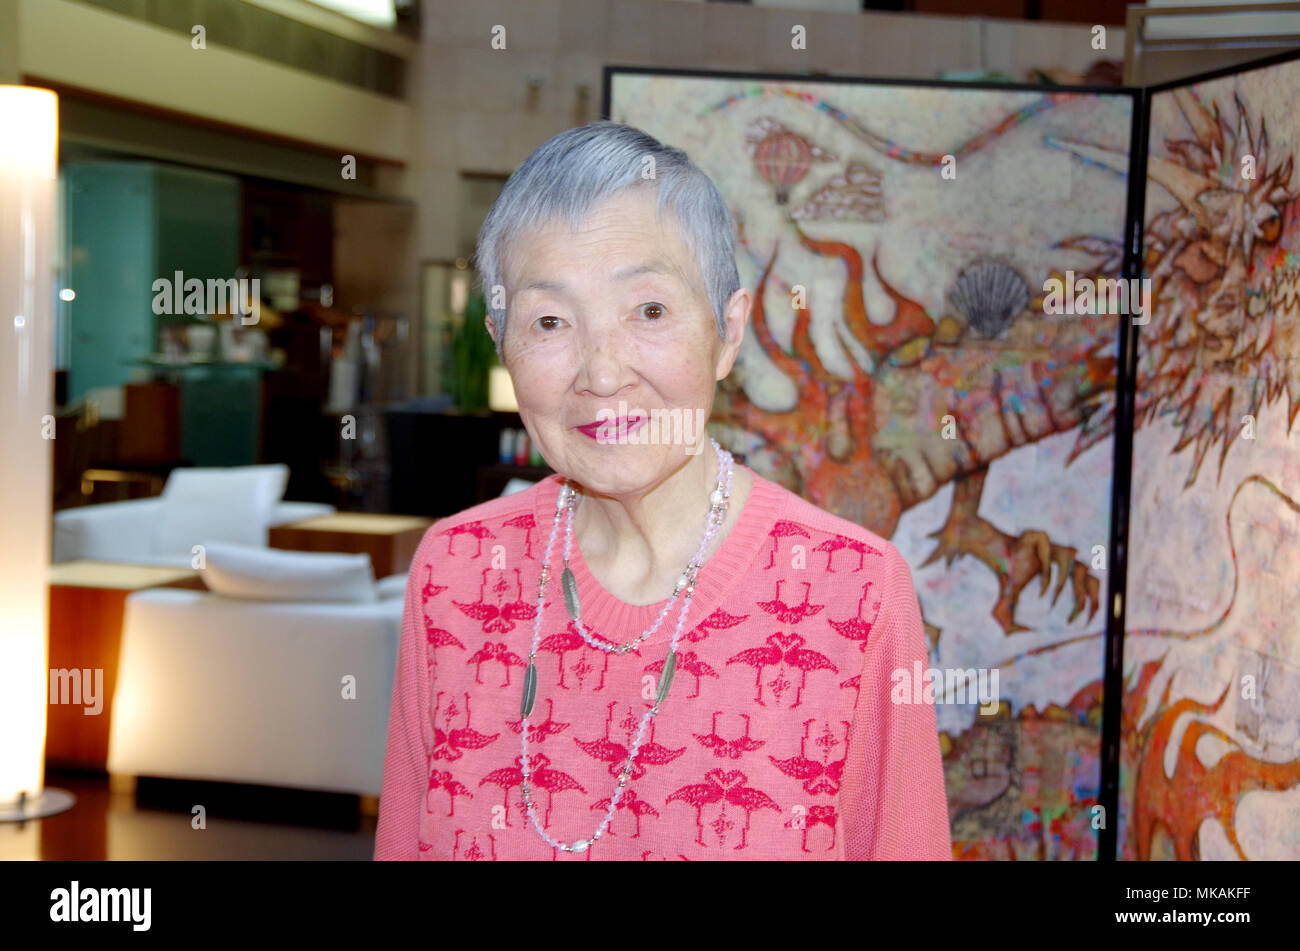 19 April 2018, Japan, Tokyo: After a long working life, the 83 year old Masako Wakamiya decided to try out something new and now she develops gaming apps. Photo: Takehiko Kambayashi/dpa Stock Photo